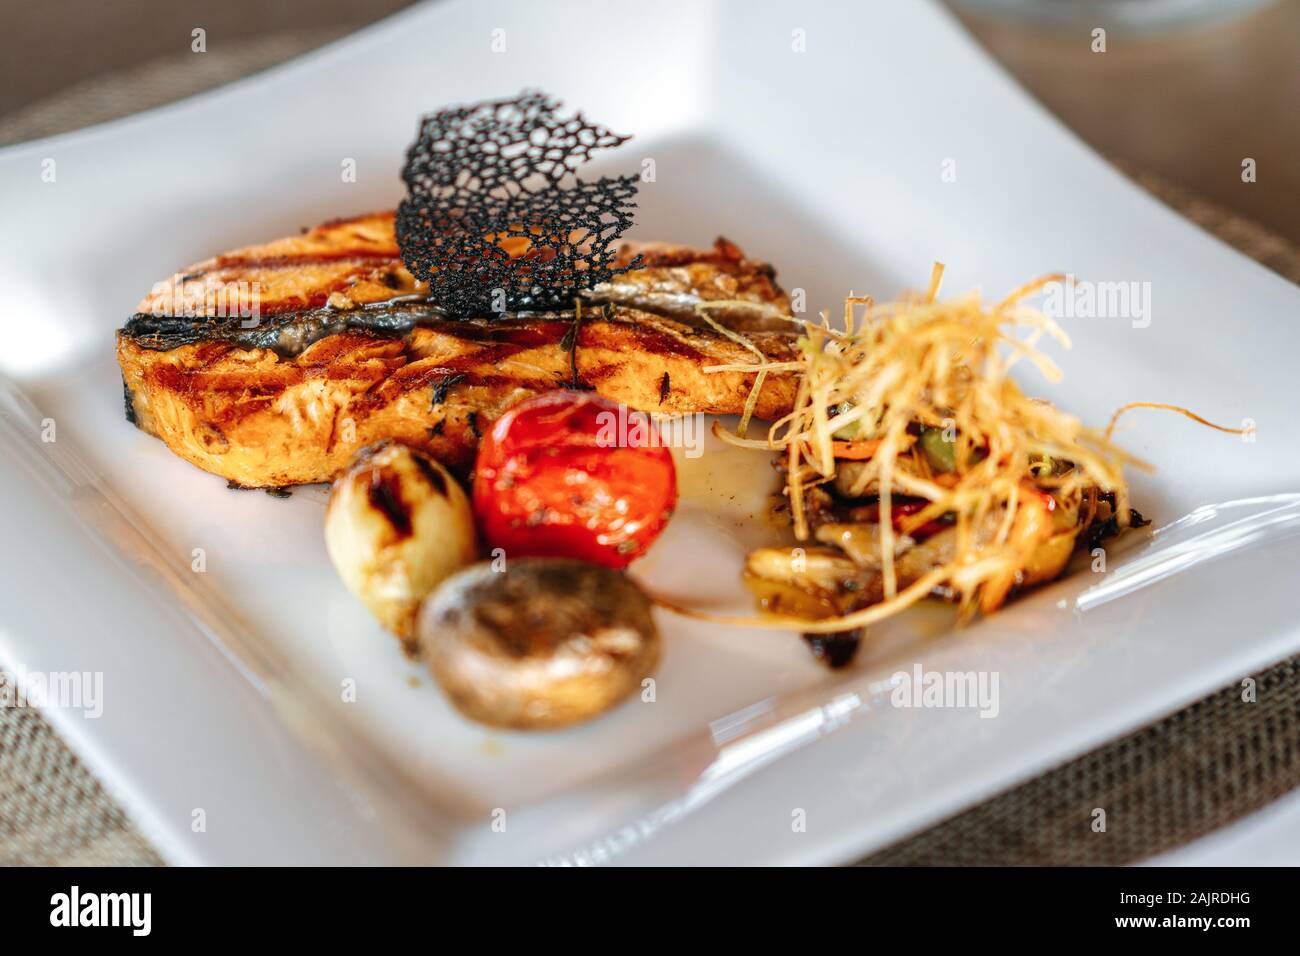 A delicious roasted salmon is served in a elegance restaurant or hotel. Stock Photo